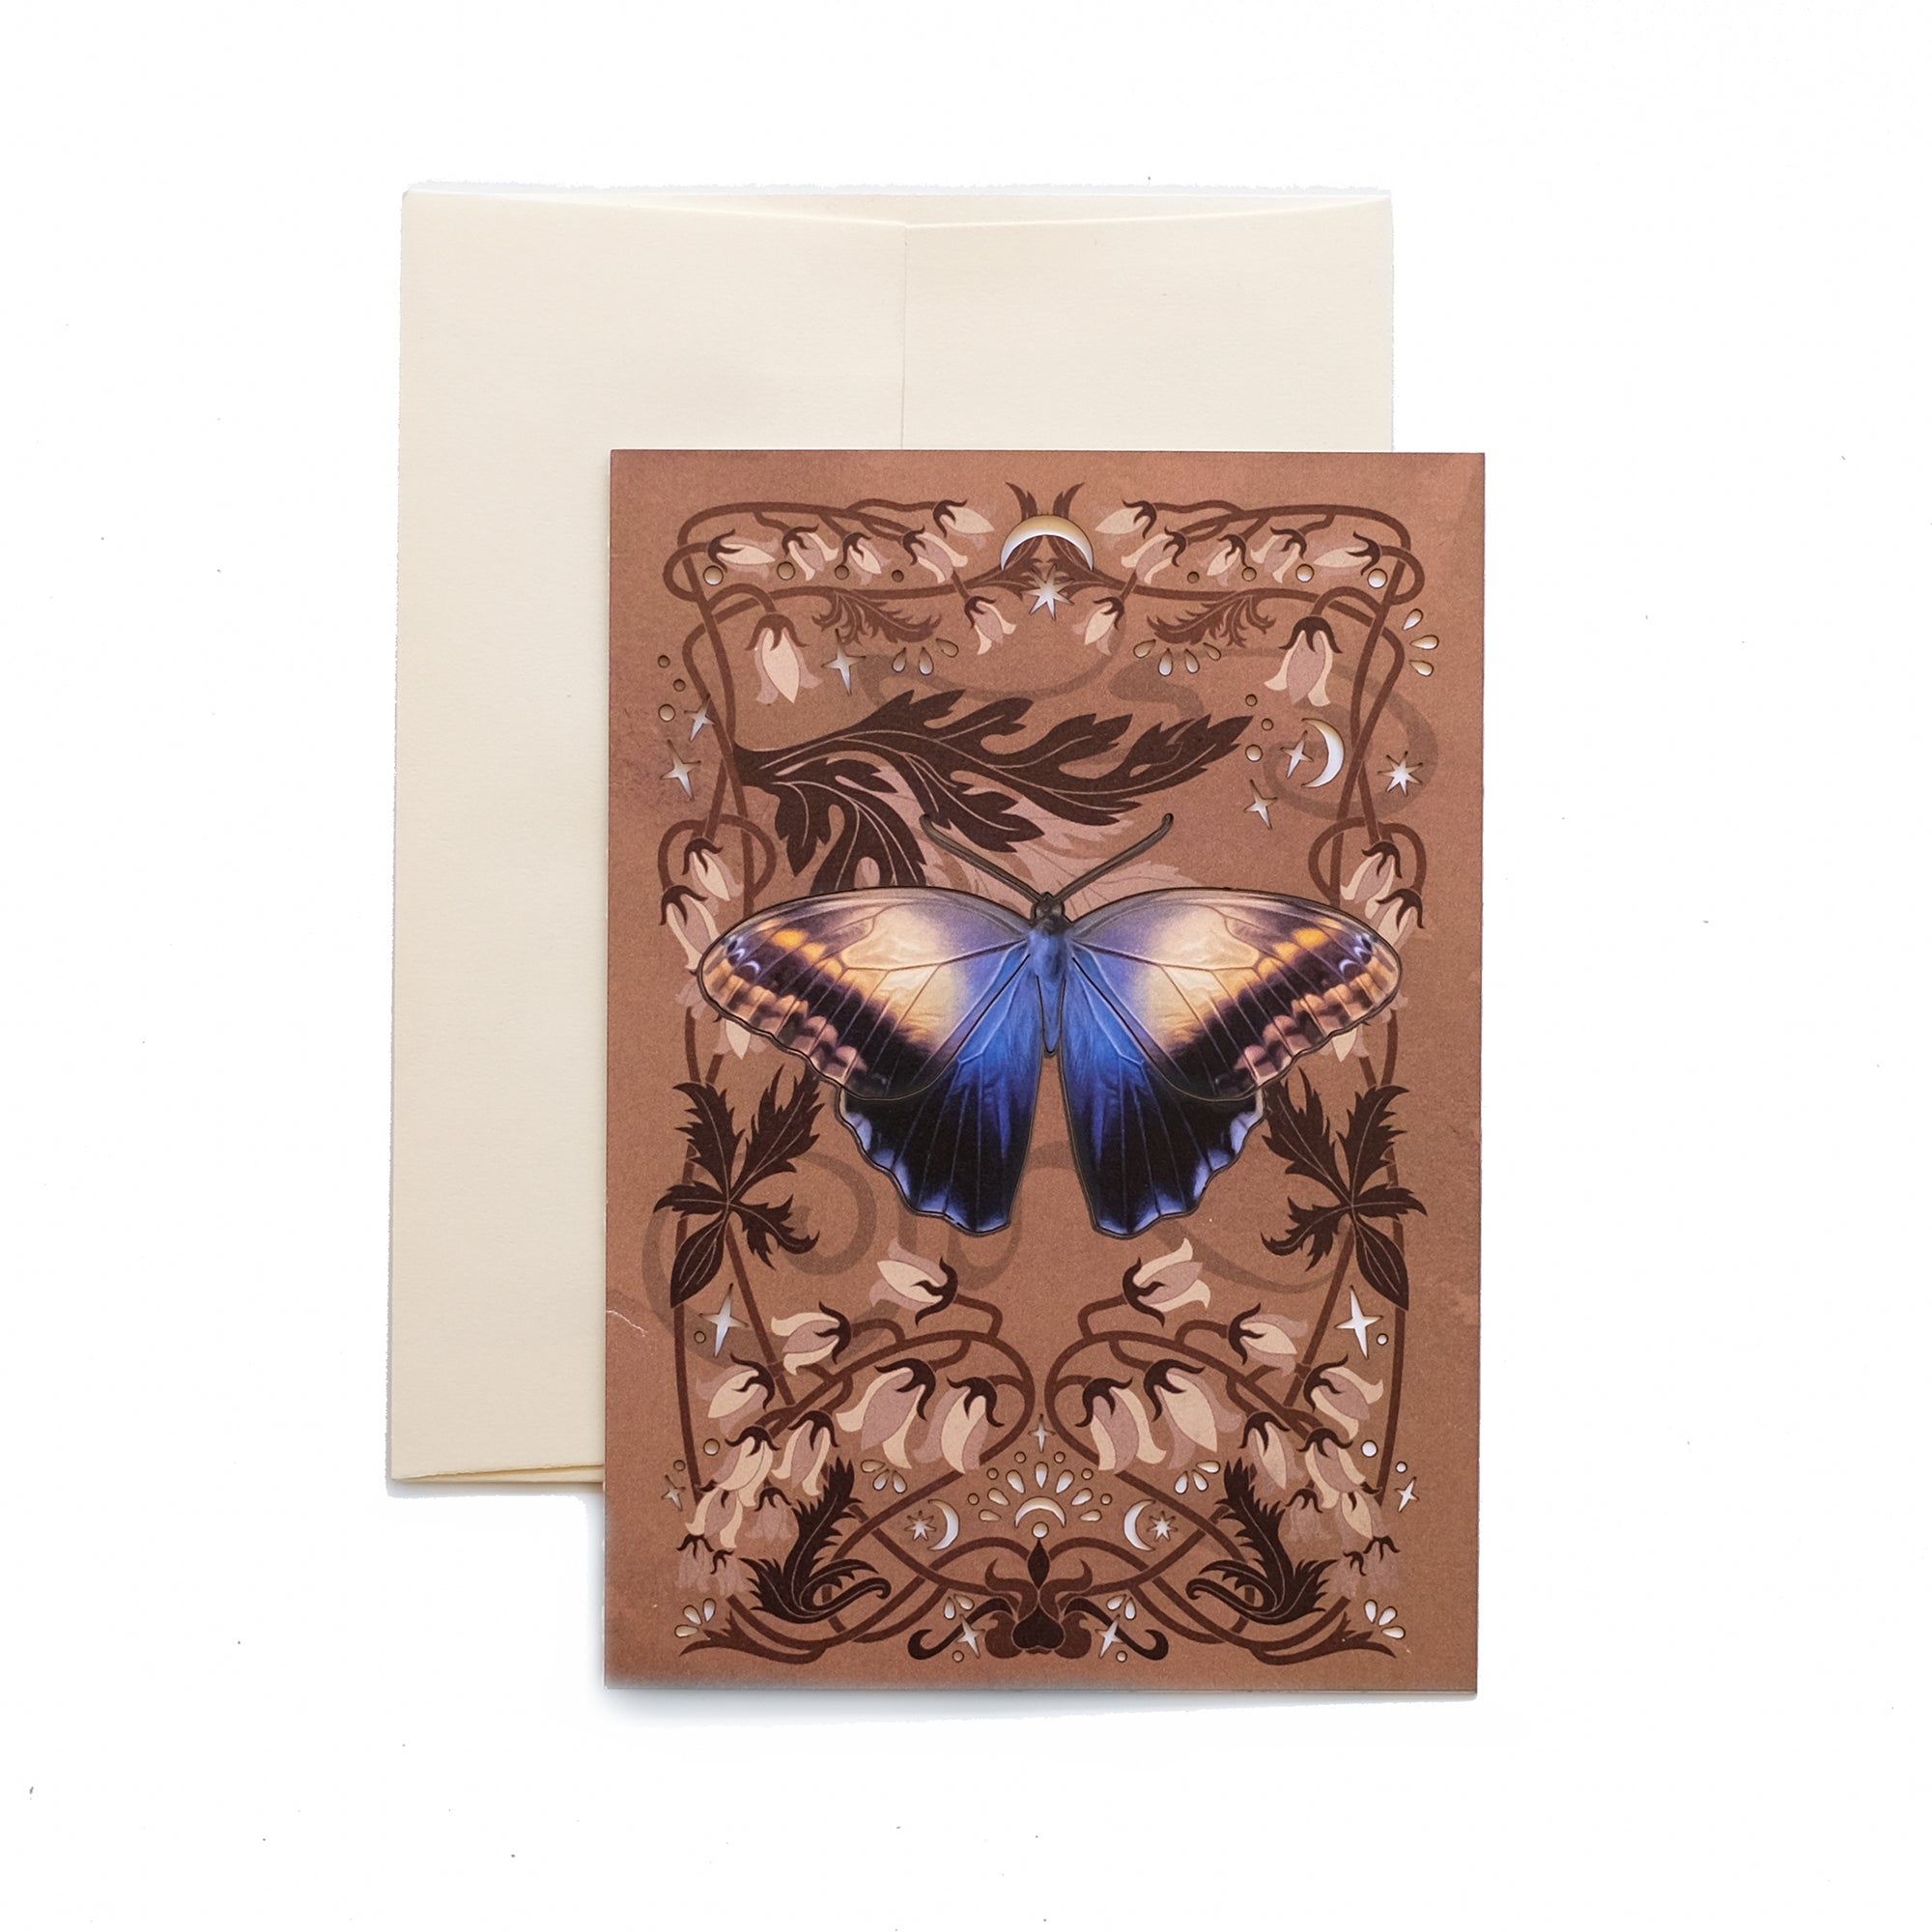 'Spooky' Moth 'Pop-Out' Greeting Cards - Set of 3